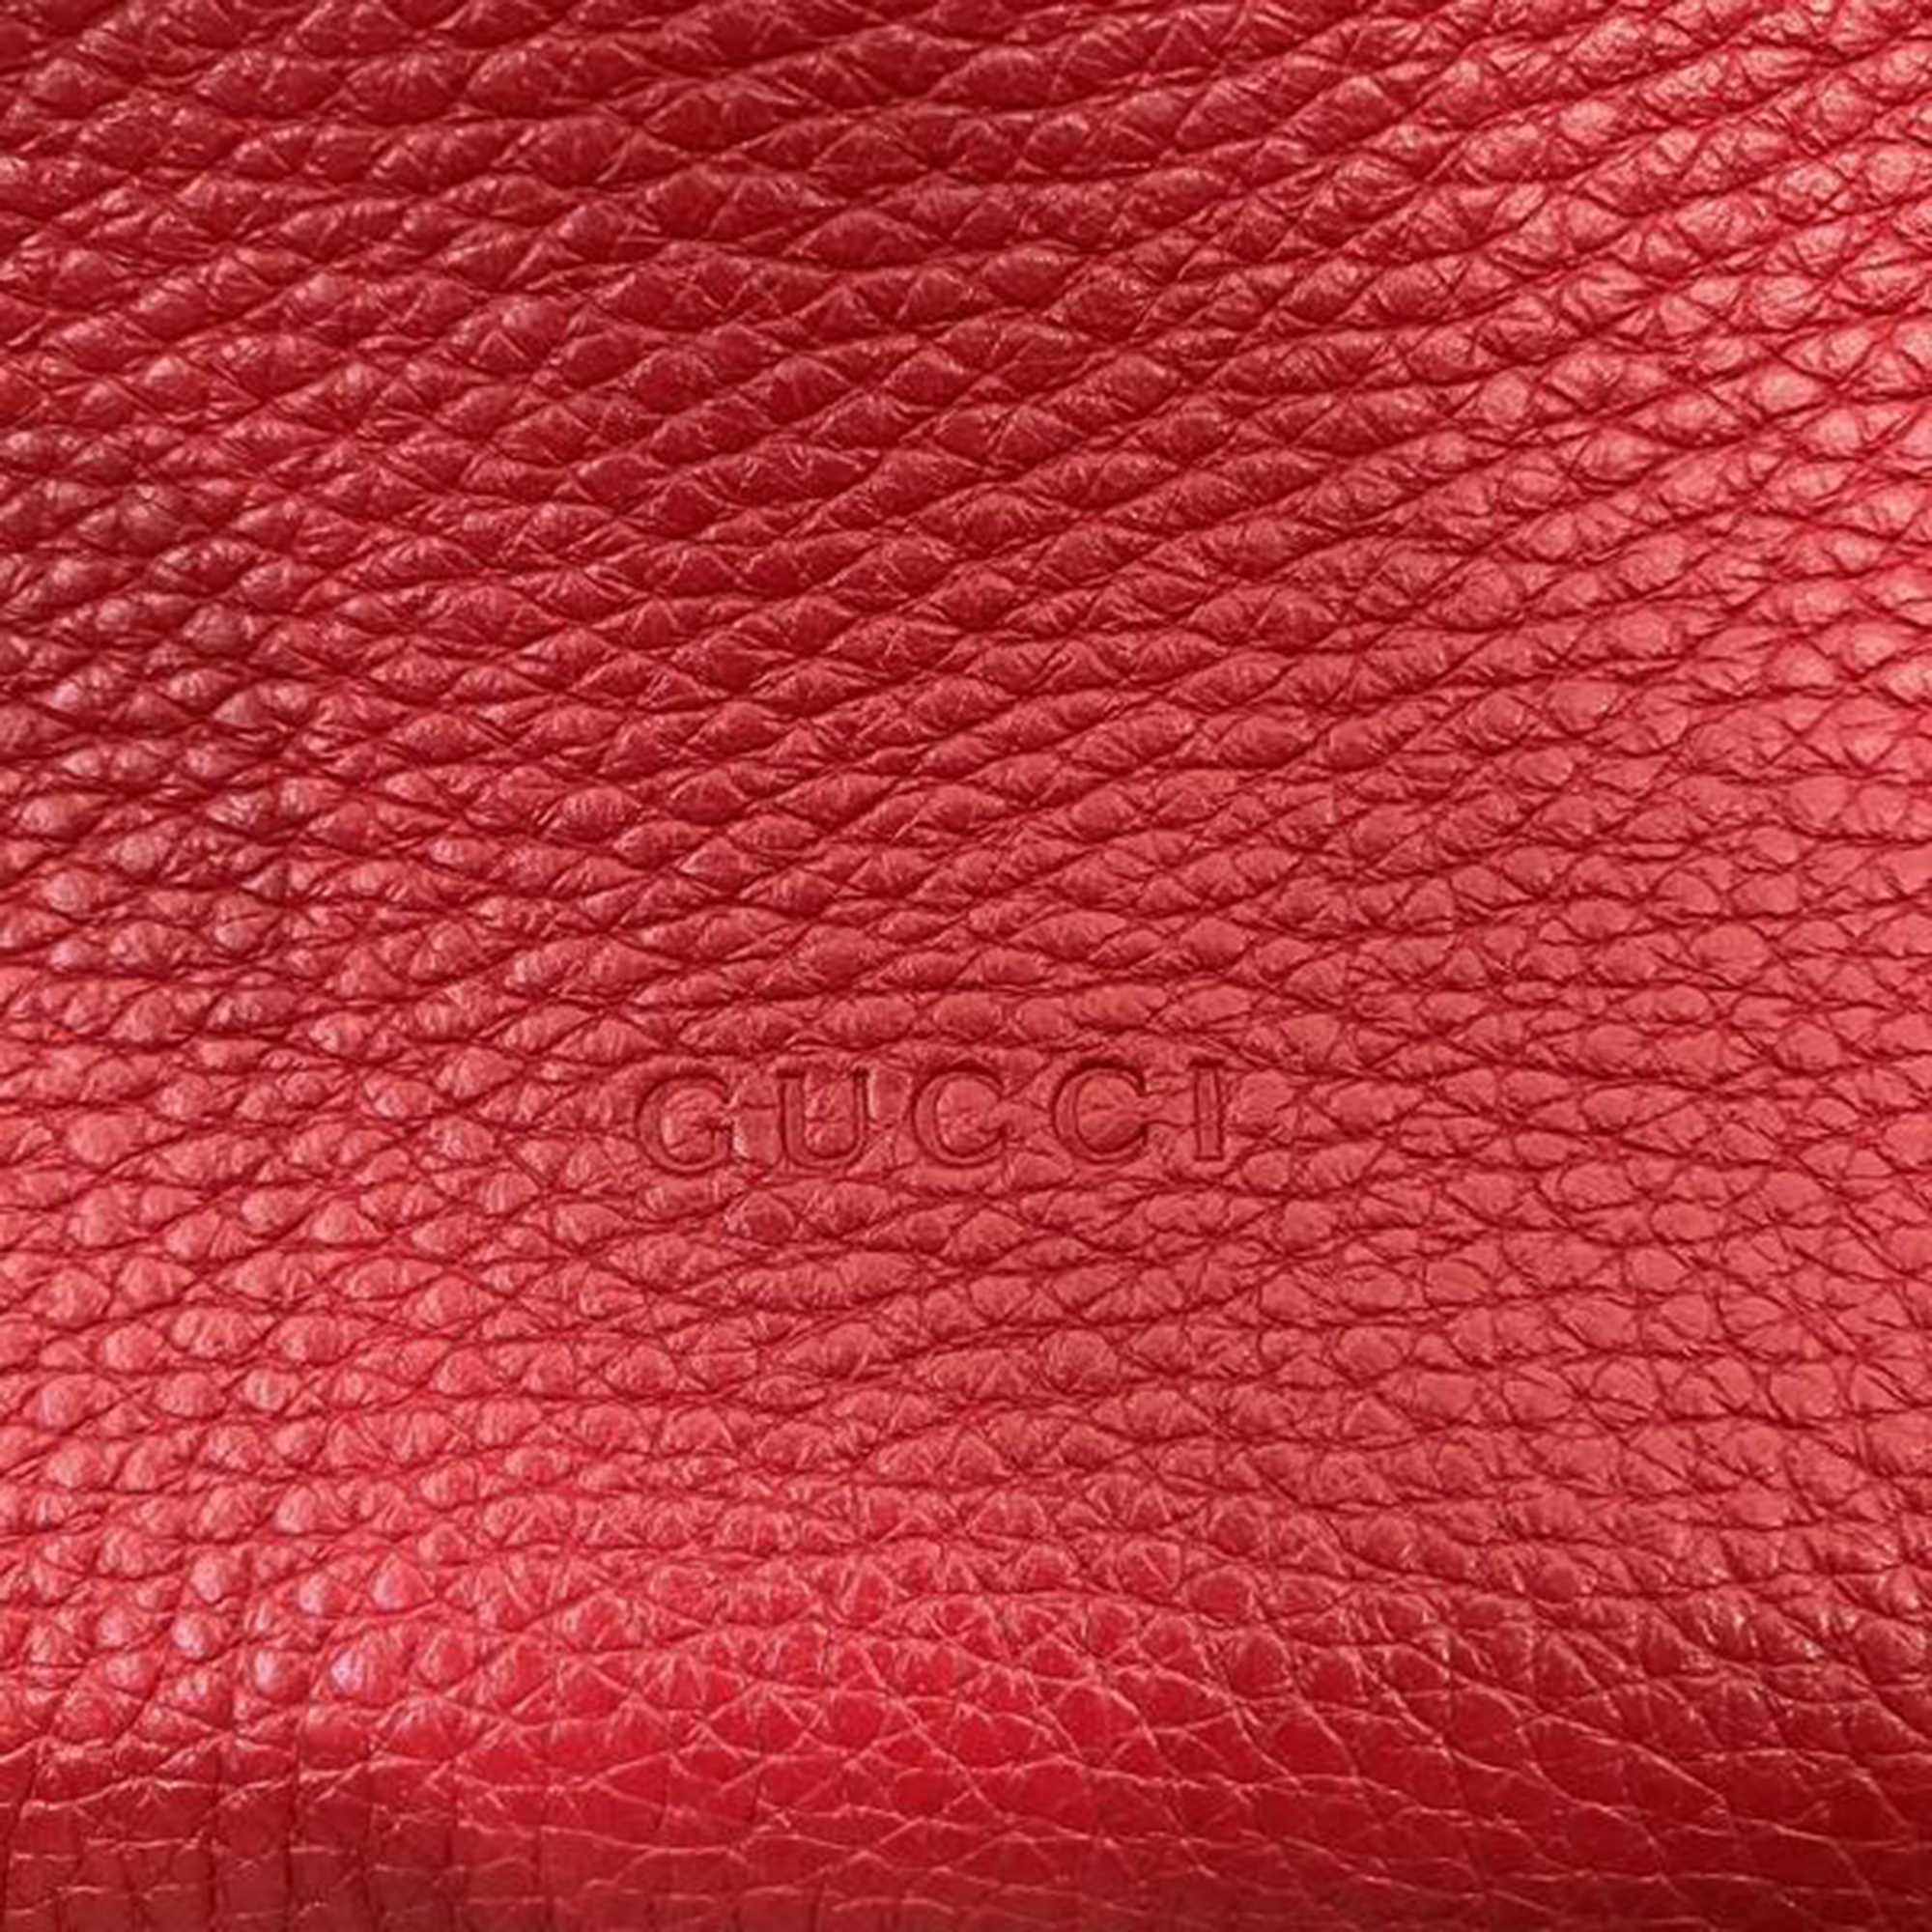 Gucci Red Leather Medium Bamboo Top Handle Bag